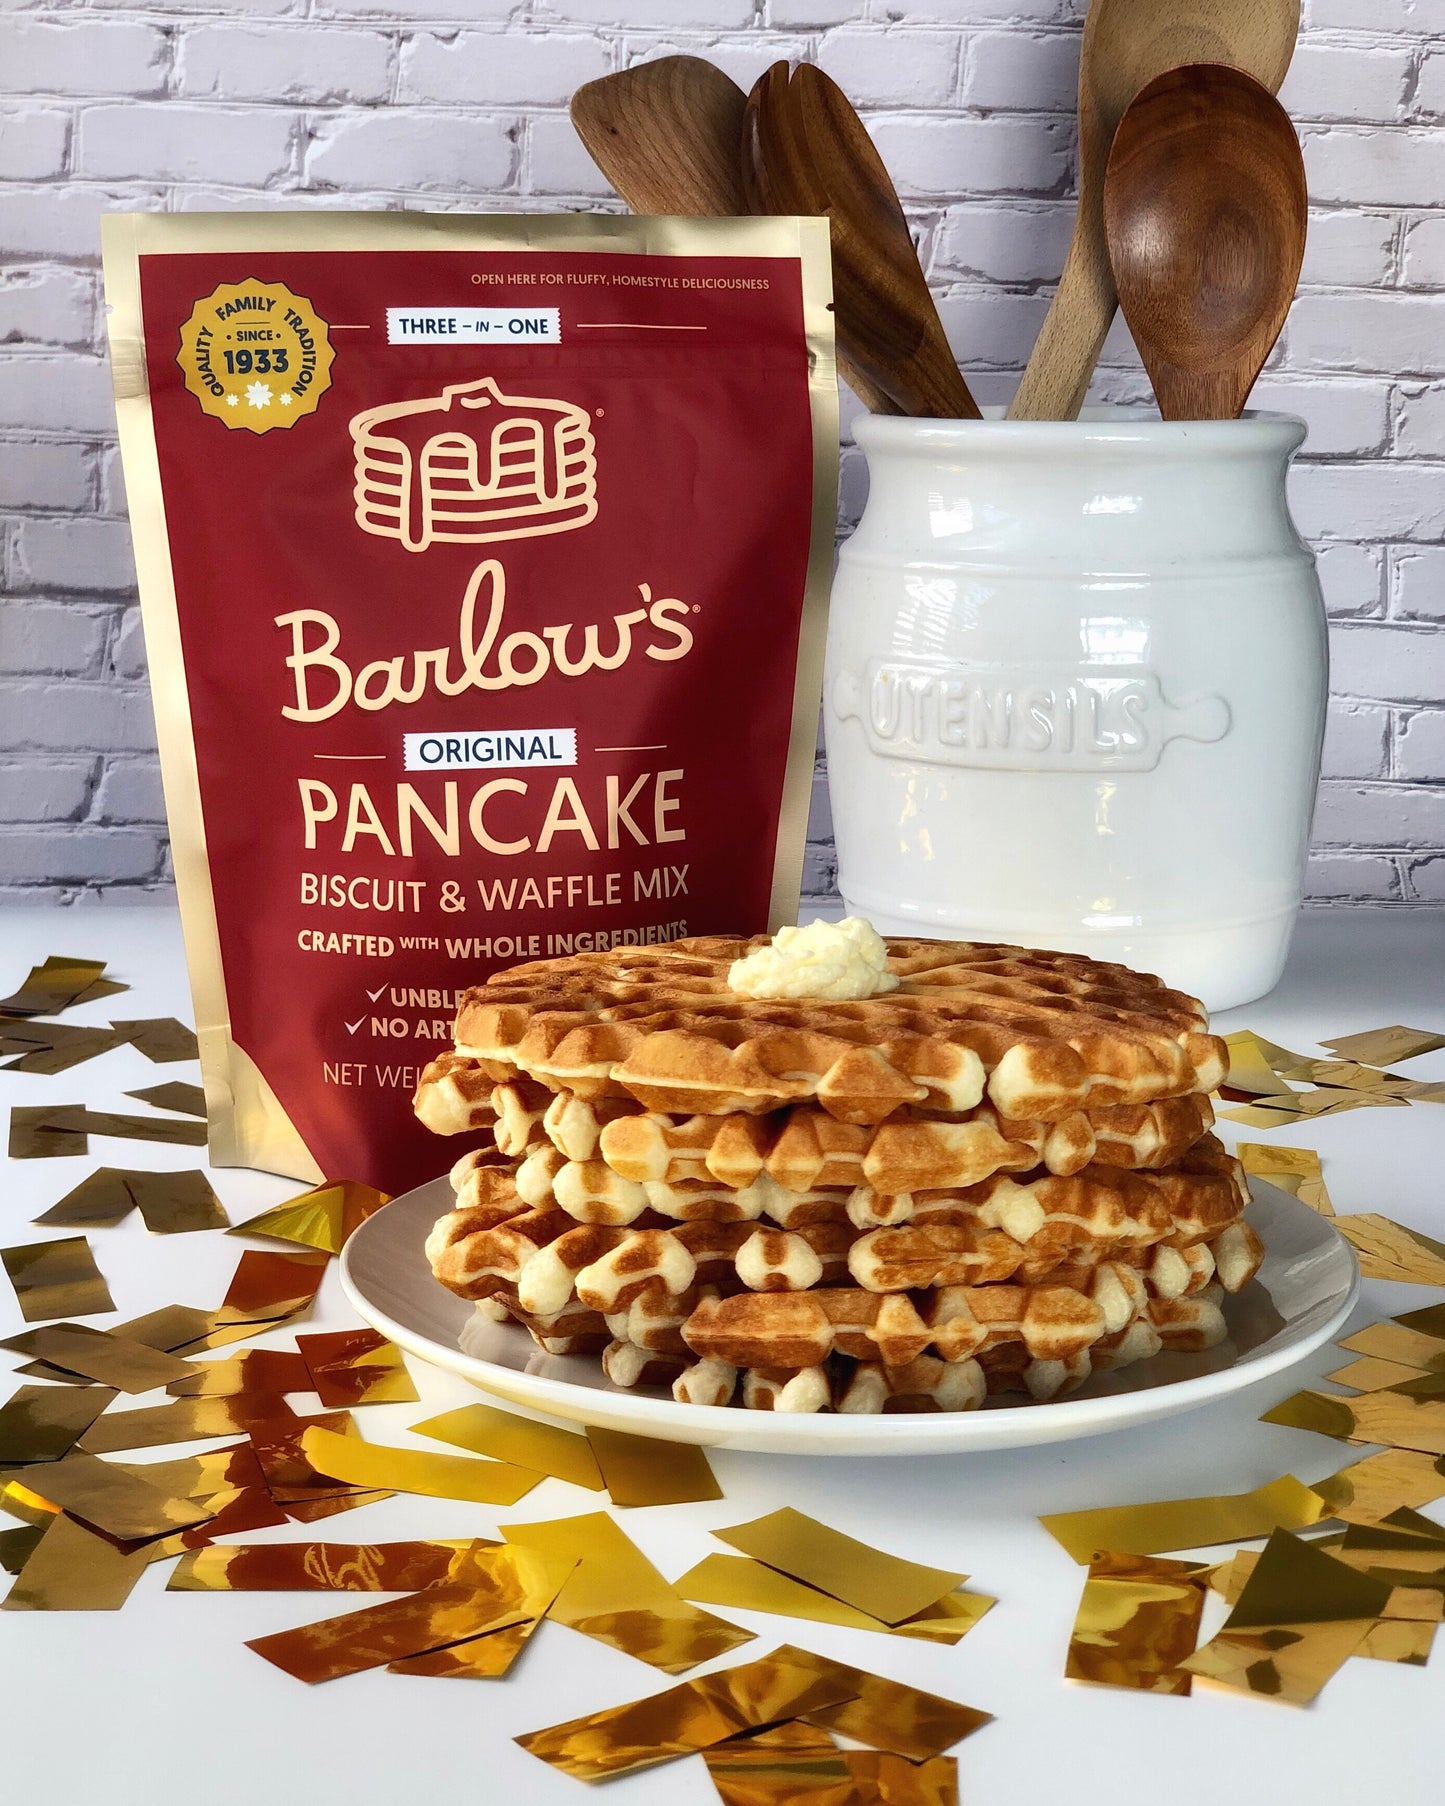 Barlow's Foods 3 in 1 Original Pancake, Biscuit and Waffle Mix 32 oz - 2 Packs